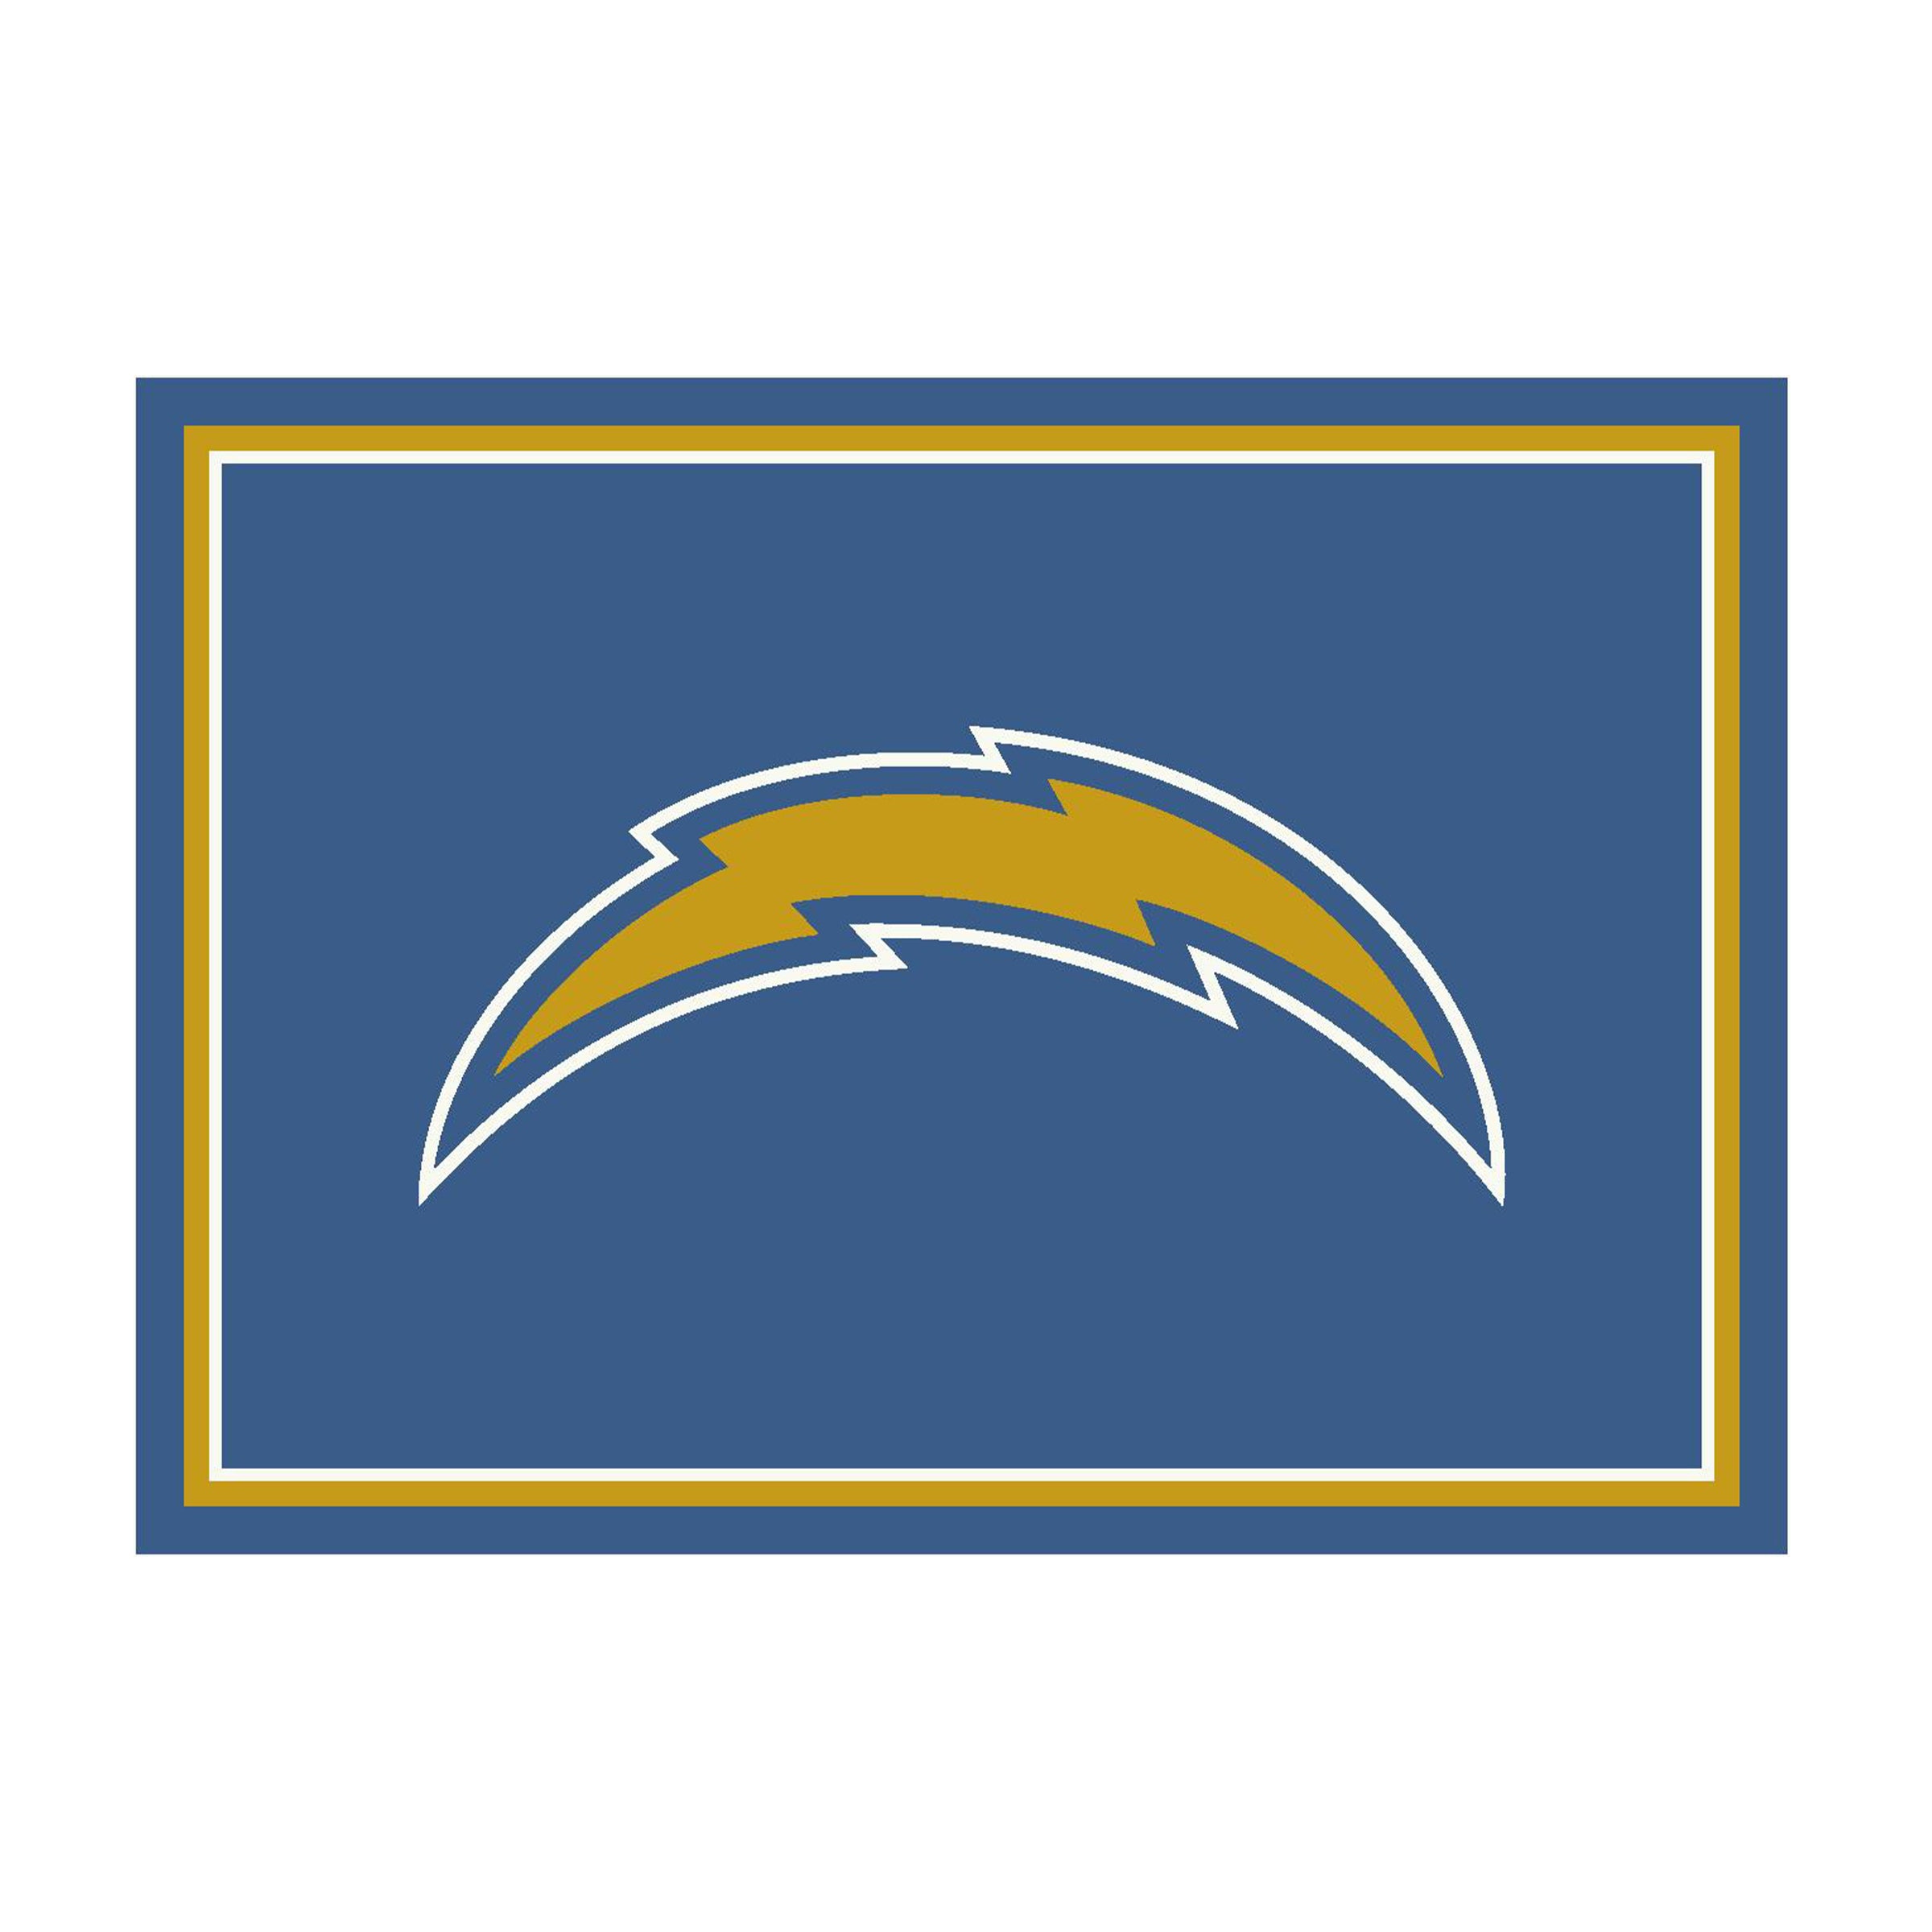 LOS ANGELES CHARGERS SPIRIT RUG